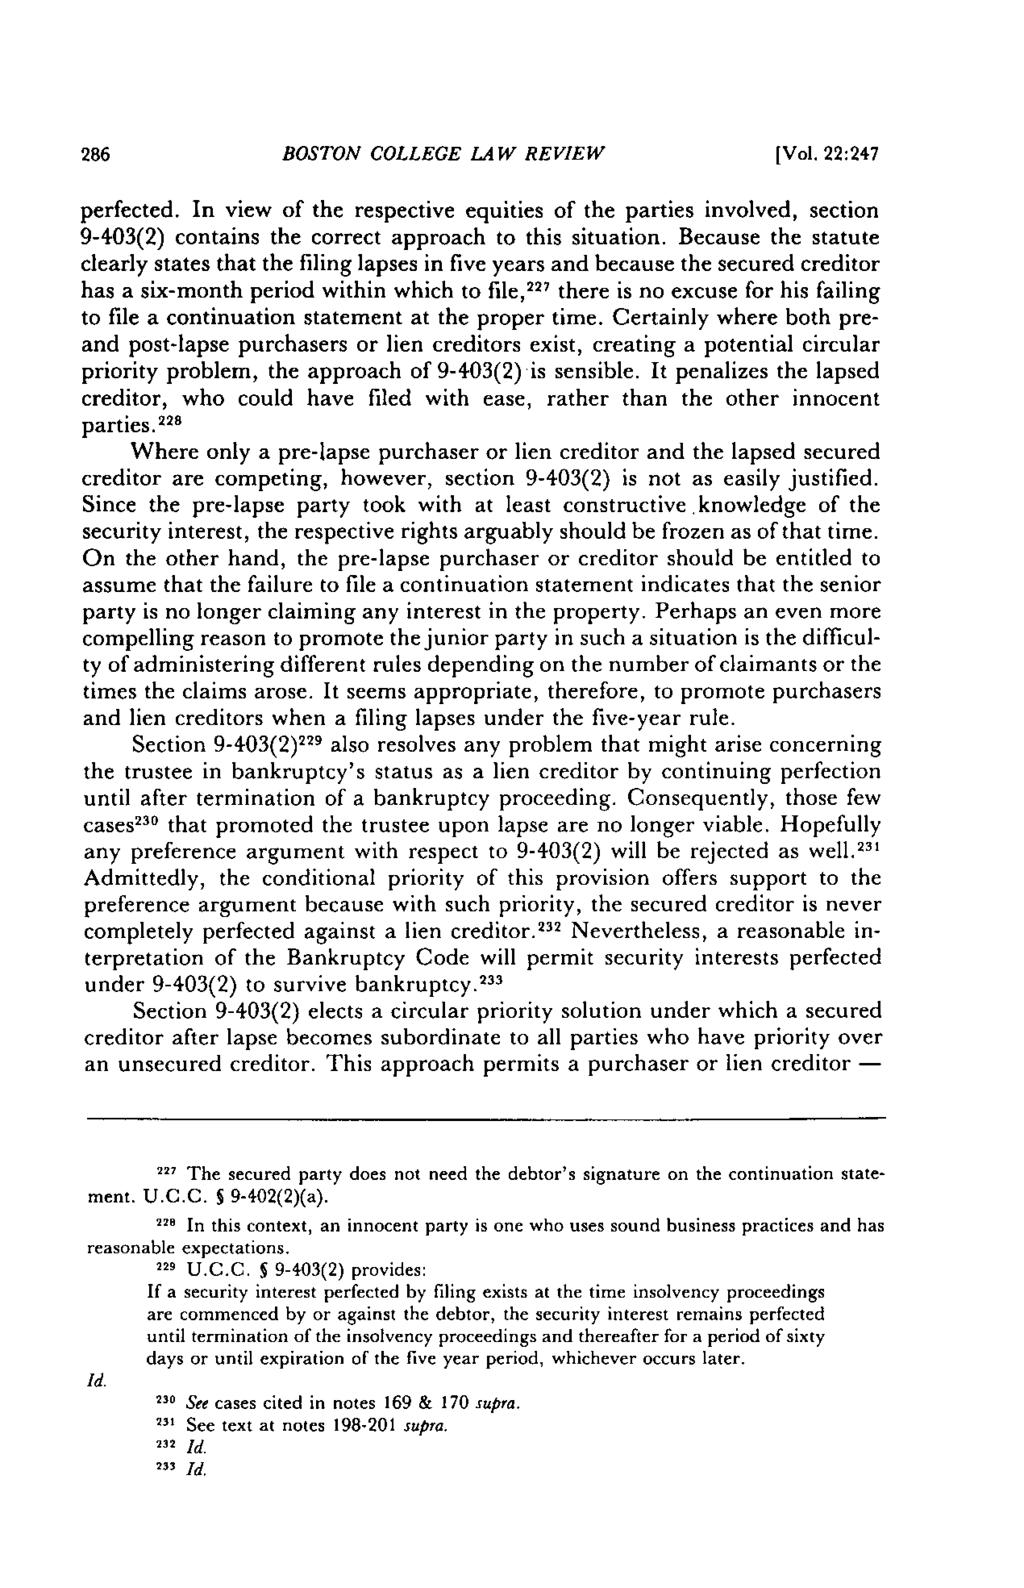 286 BOSTON COLLEGE LAW REVIEW [Vol. 22:247 perfected. In view of the respective equities of the parties involved, section 9-403(2) contains the correct approach to this situation.